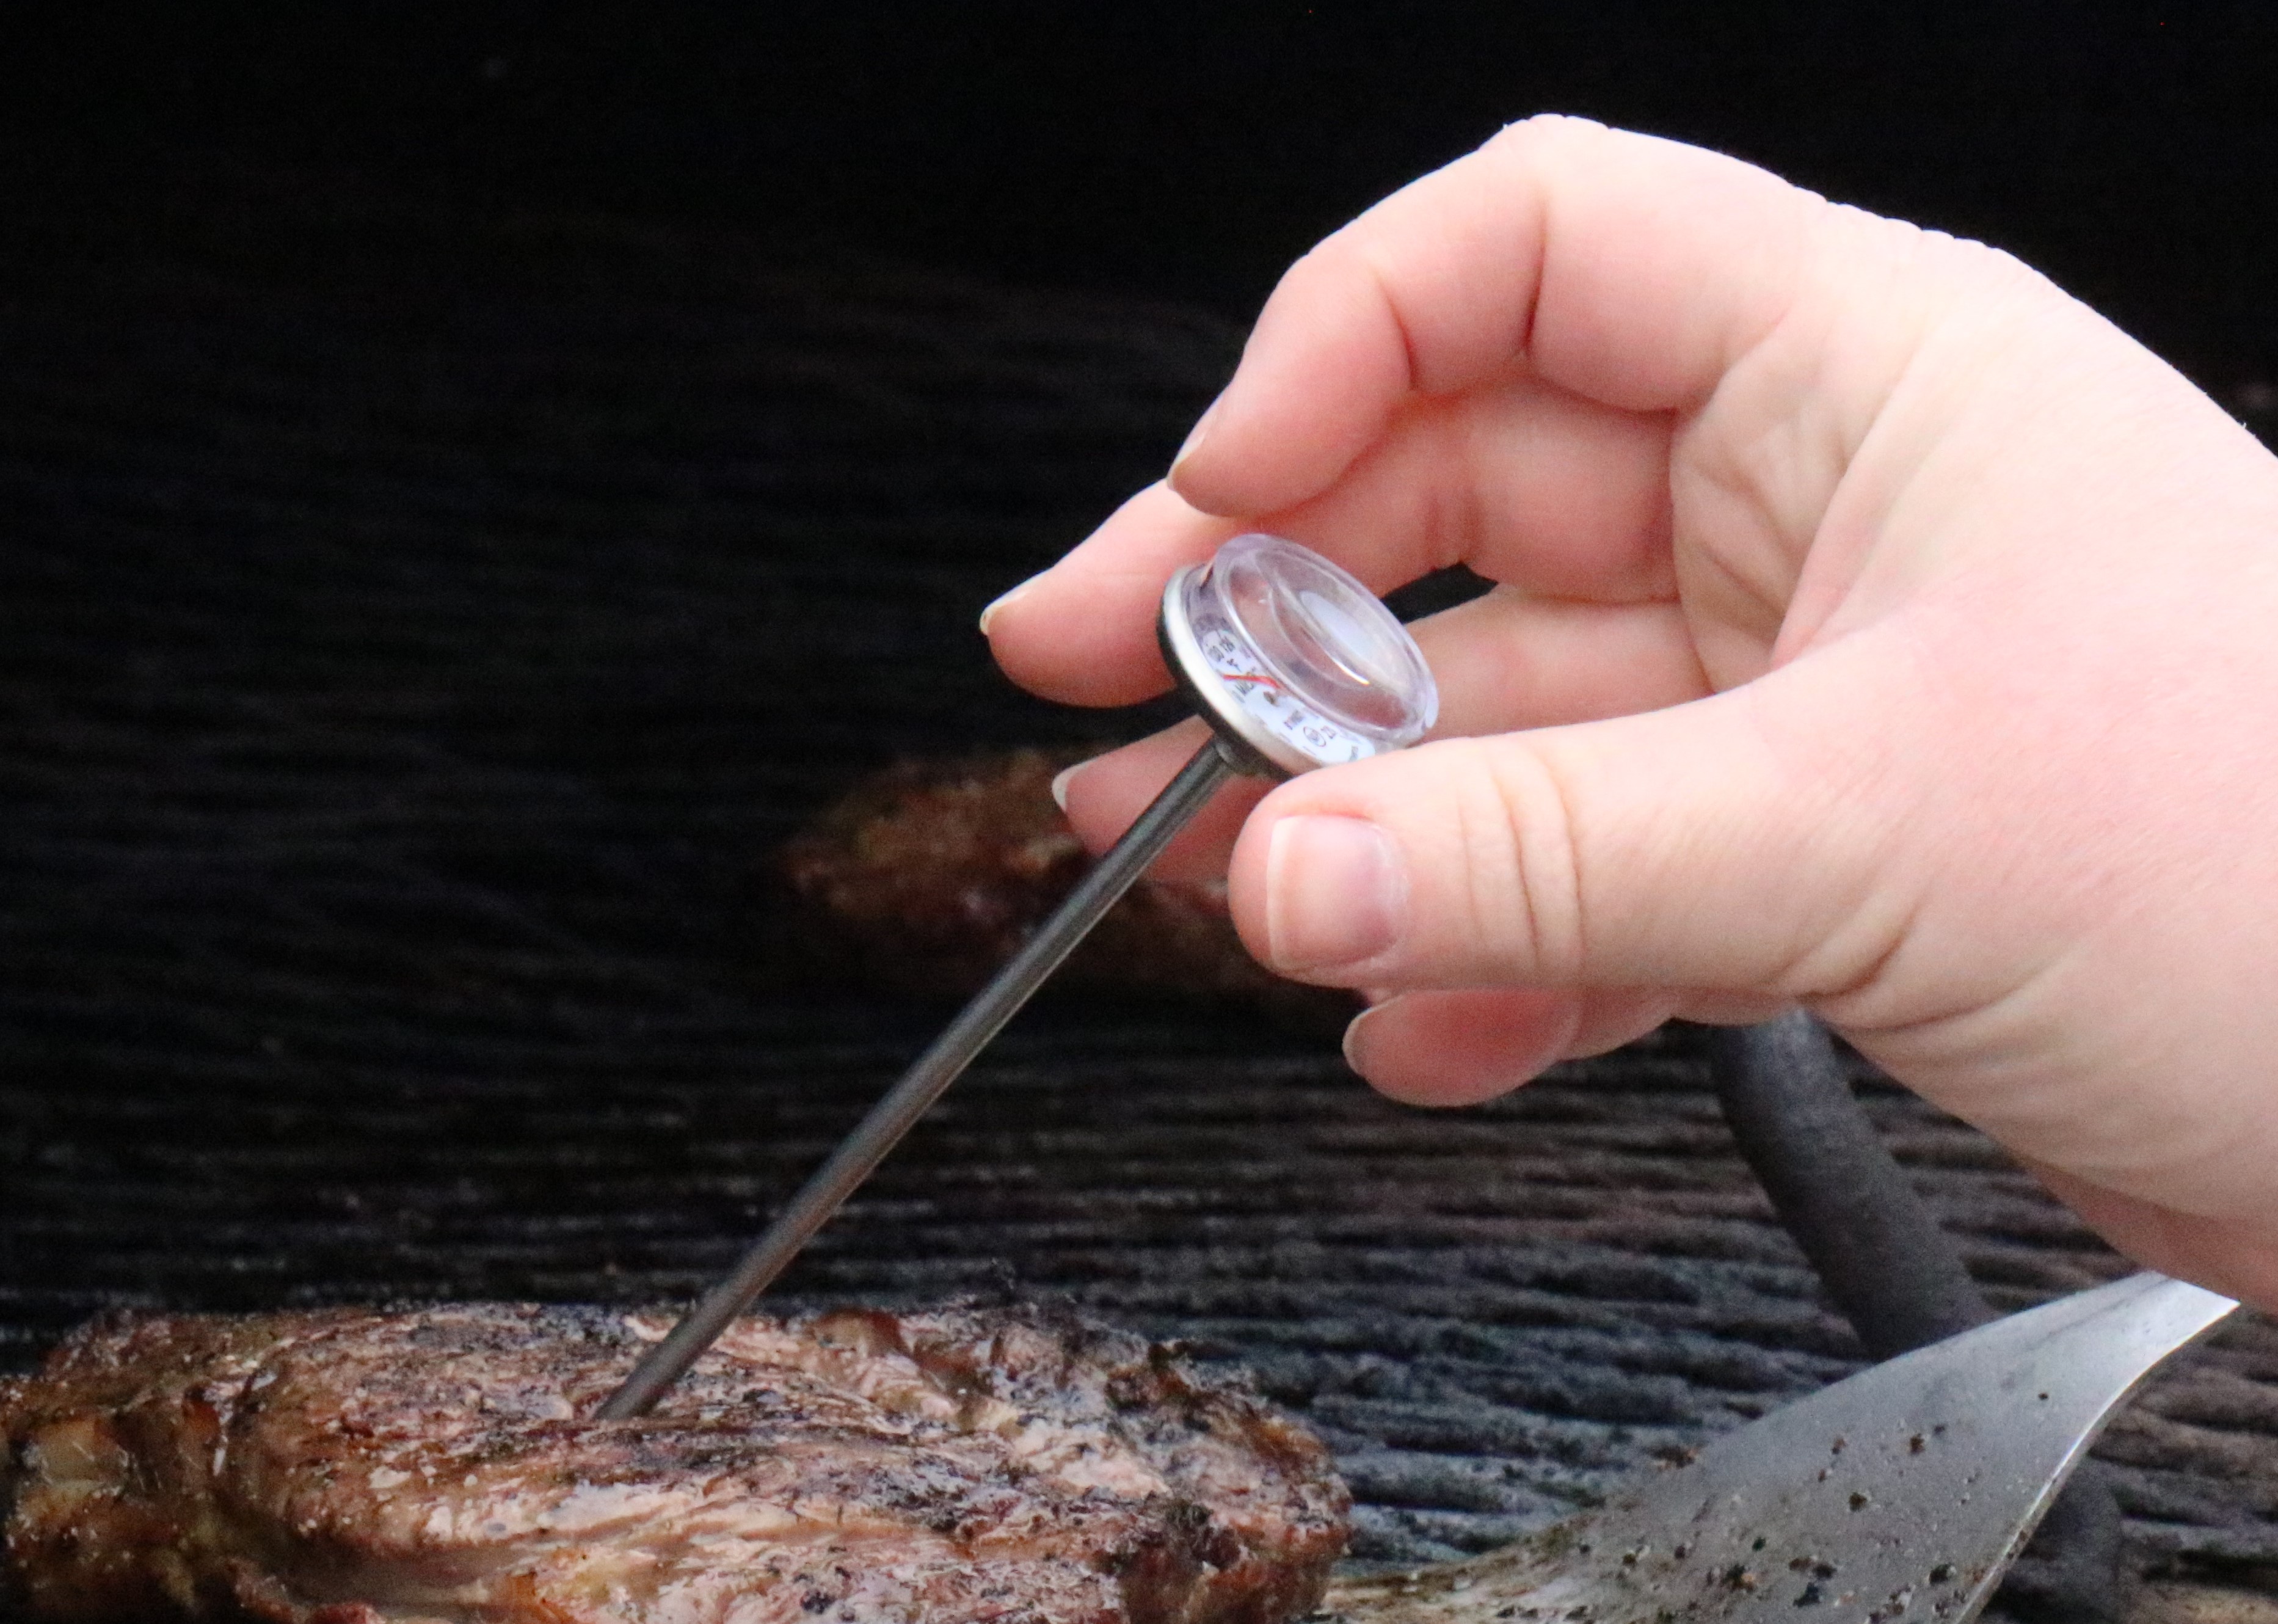 A hand with a thermometer checks the temperature of a steak on a grill.